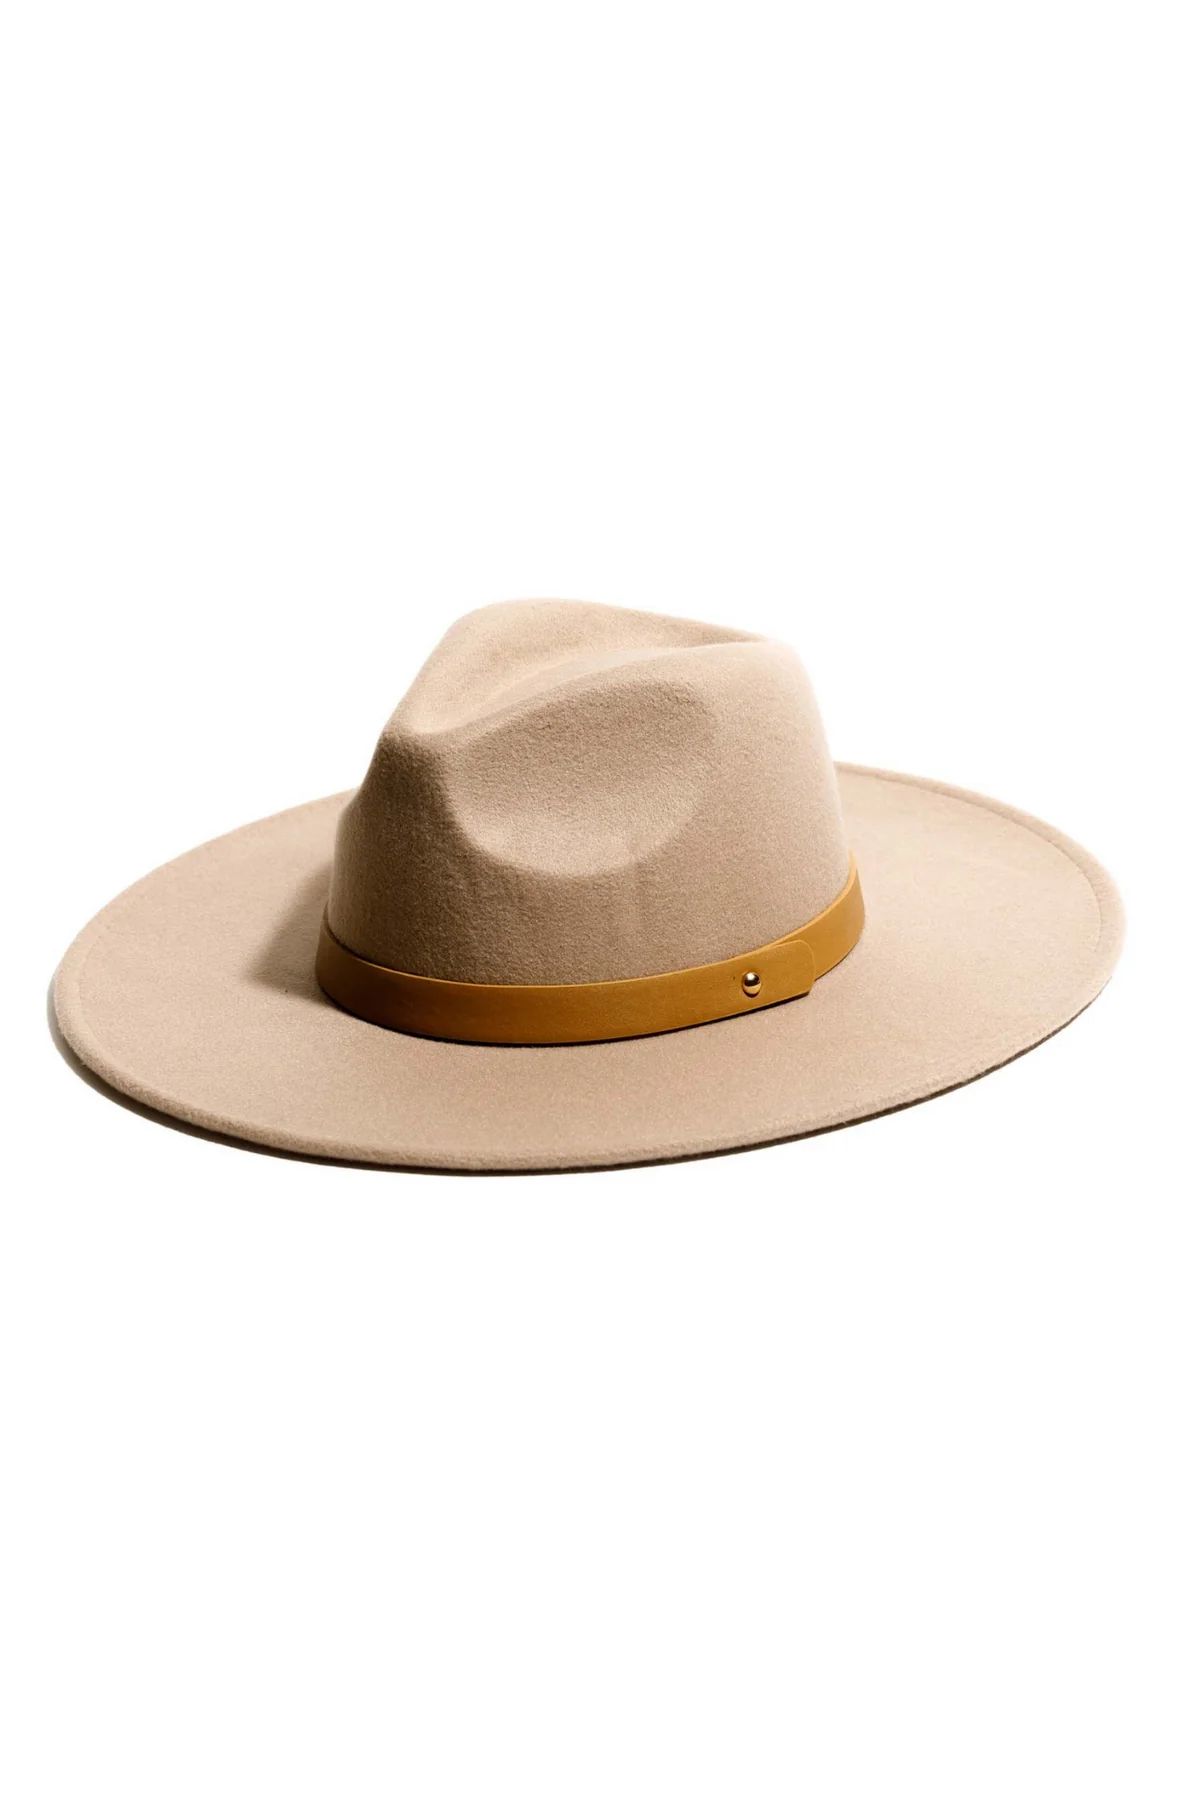 Blythe Rancher Hat - Camel | THELIFESTYLEDCO